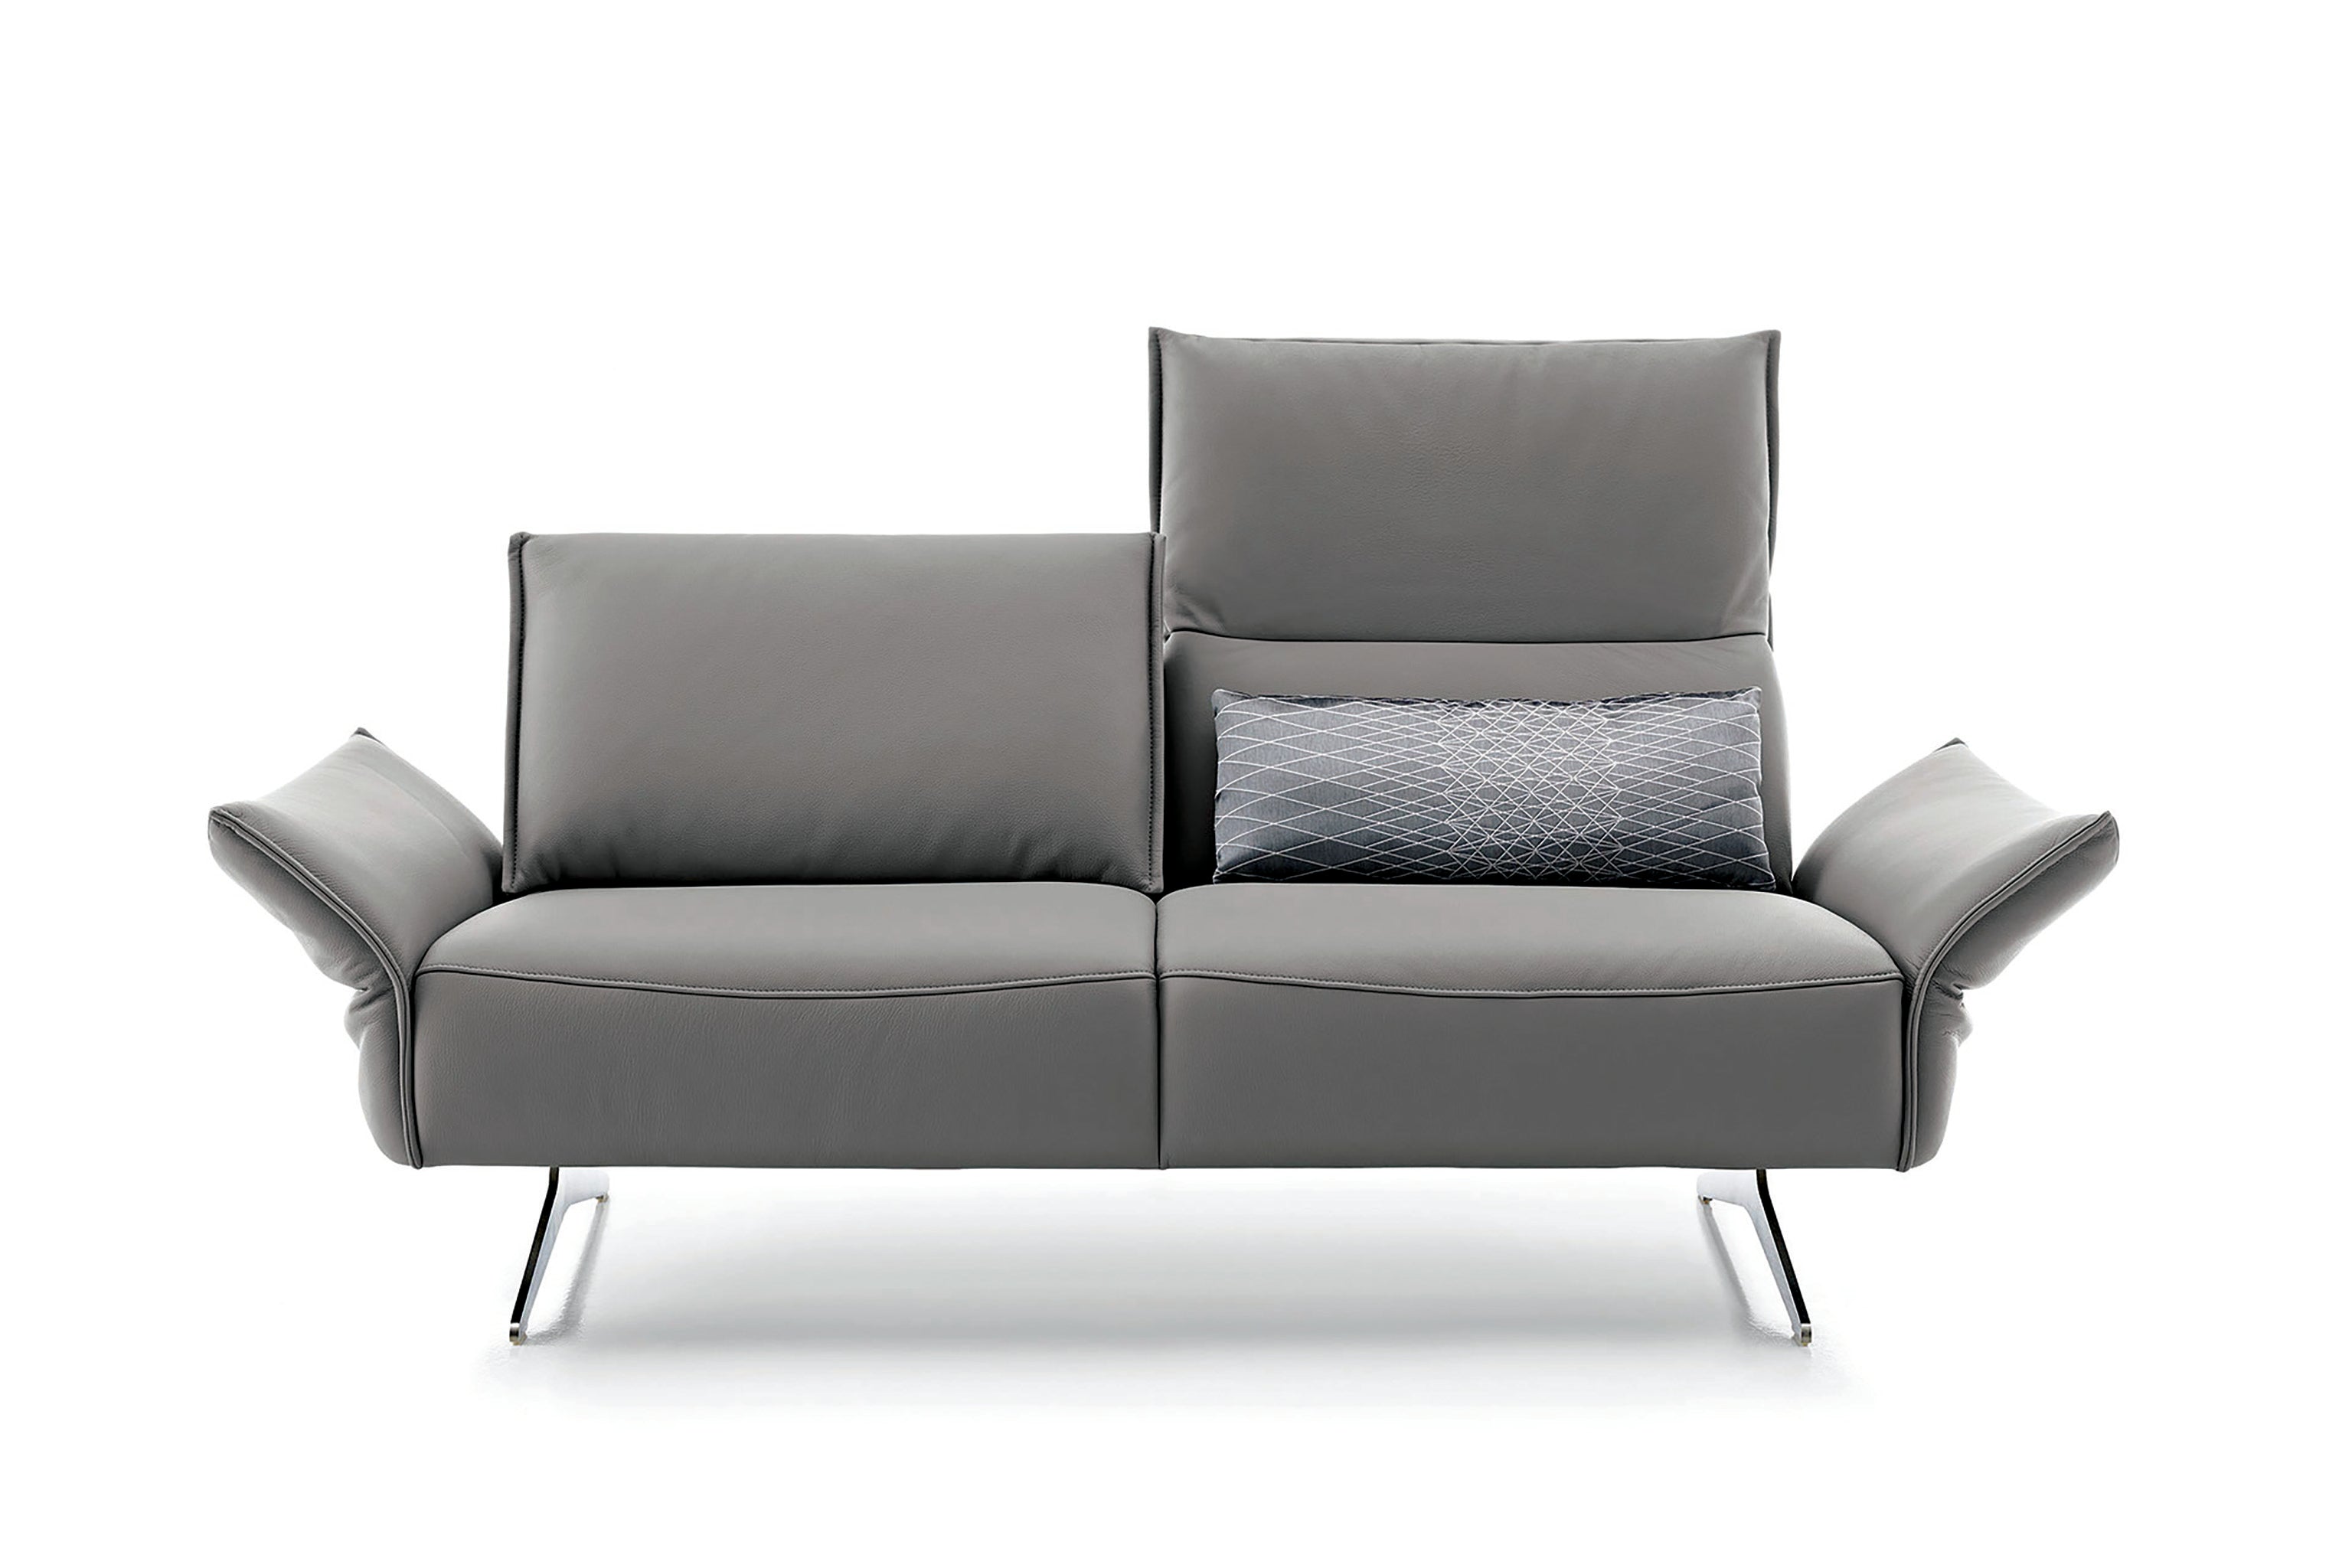 VINETO 2.5 Seater Functional Sofa in Leather by Koinor